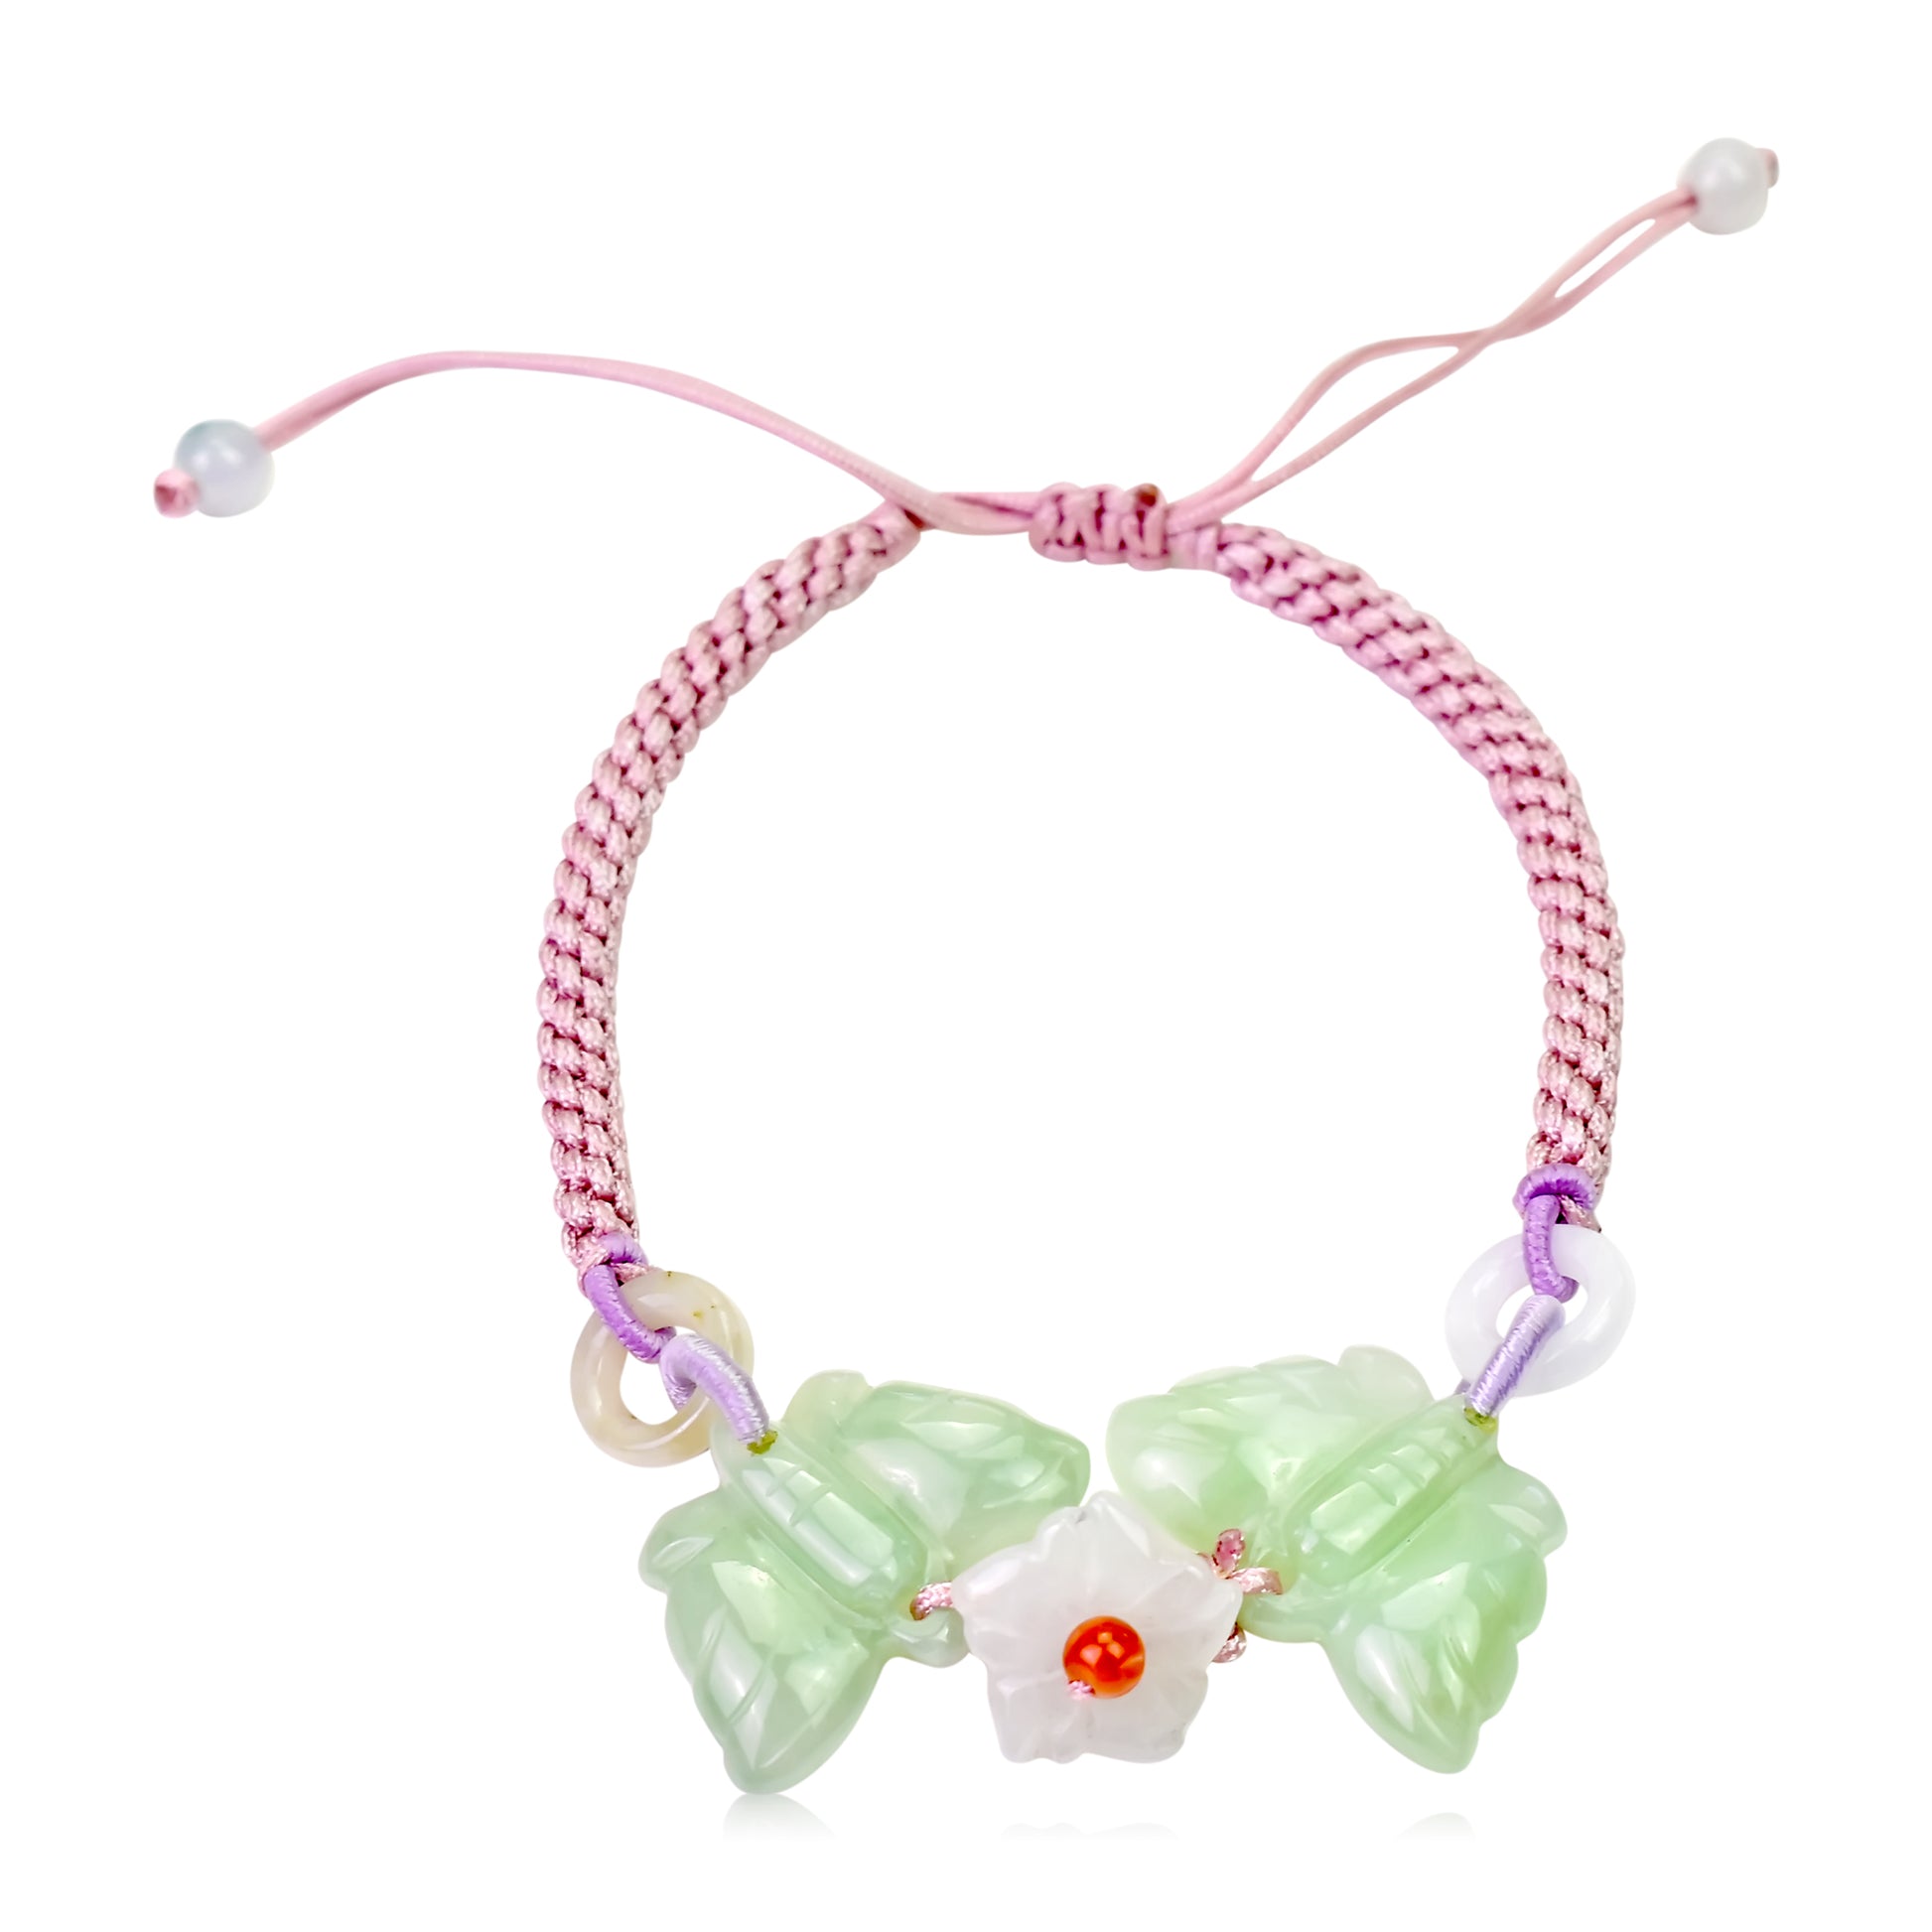 Fly Away with Style with Two Joyful Butterflies Jade Bracelet made with Pink Cord